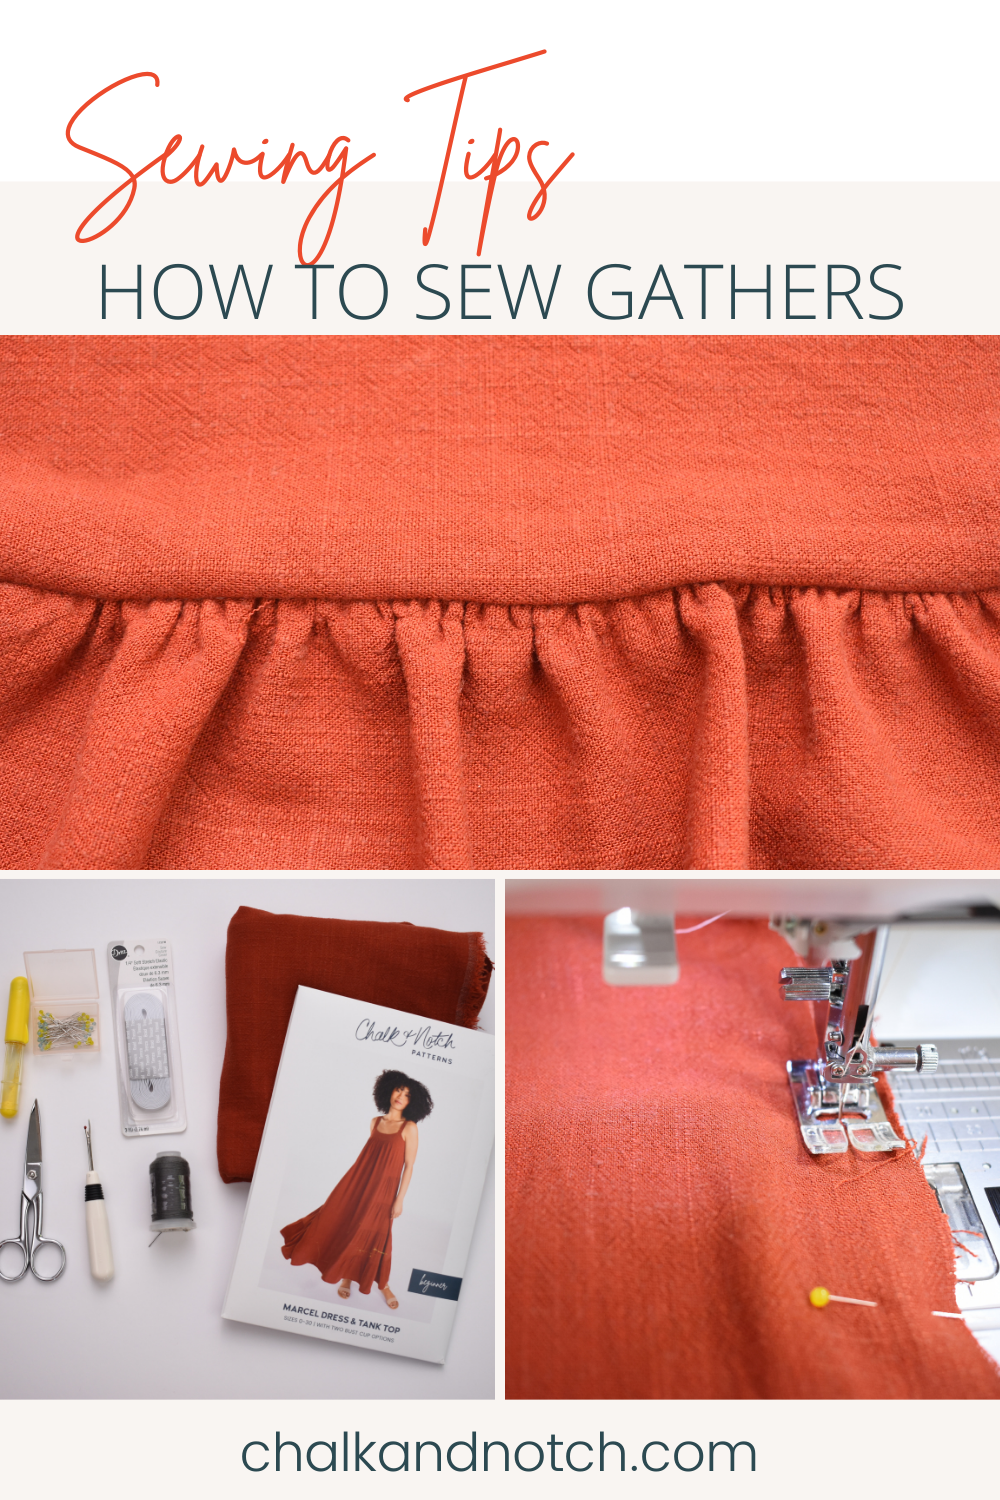 Sewing Tips | How to Sew Gathers: A sewing tutorial sharing three ways to sew gathers in your apparel sewing patterns.